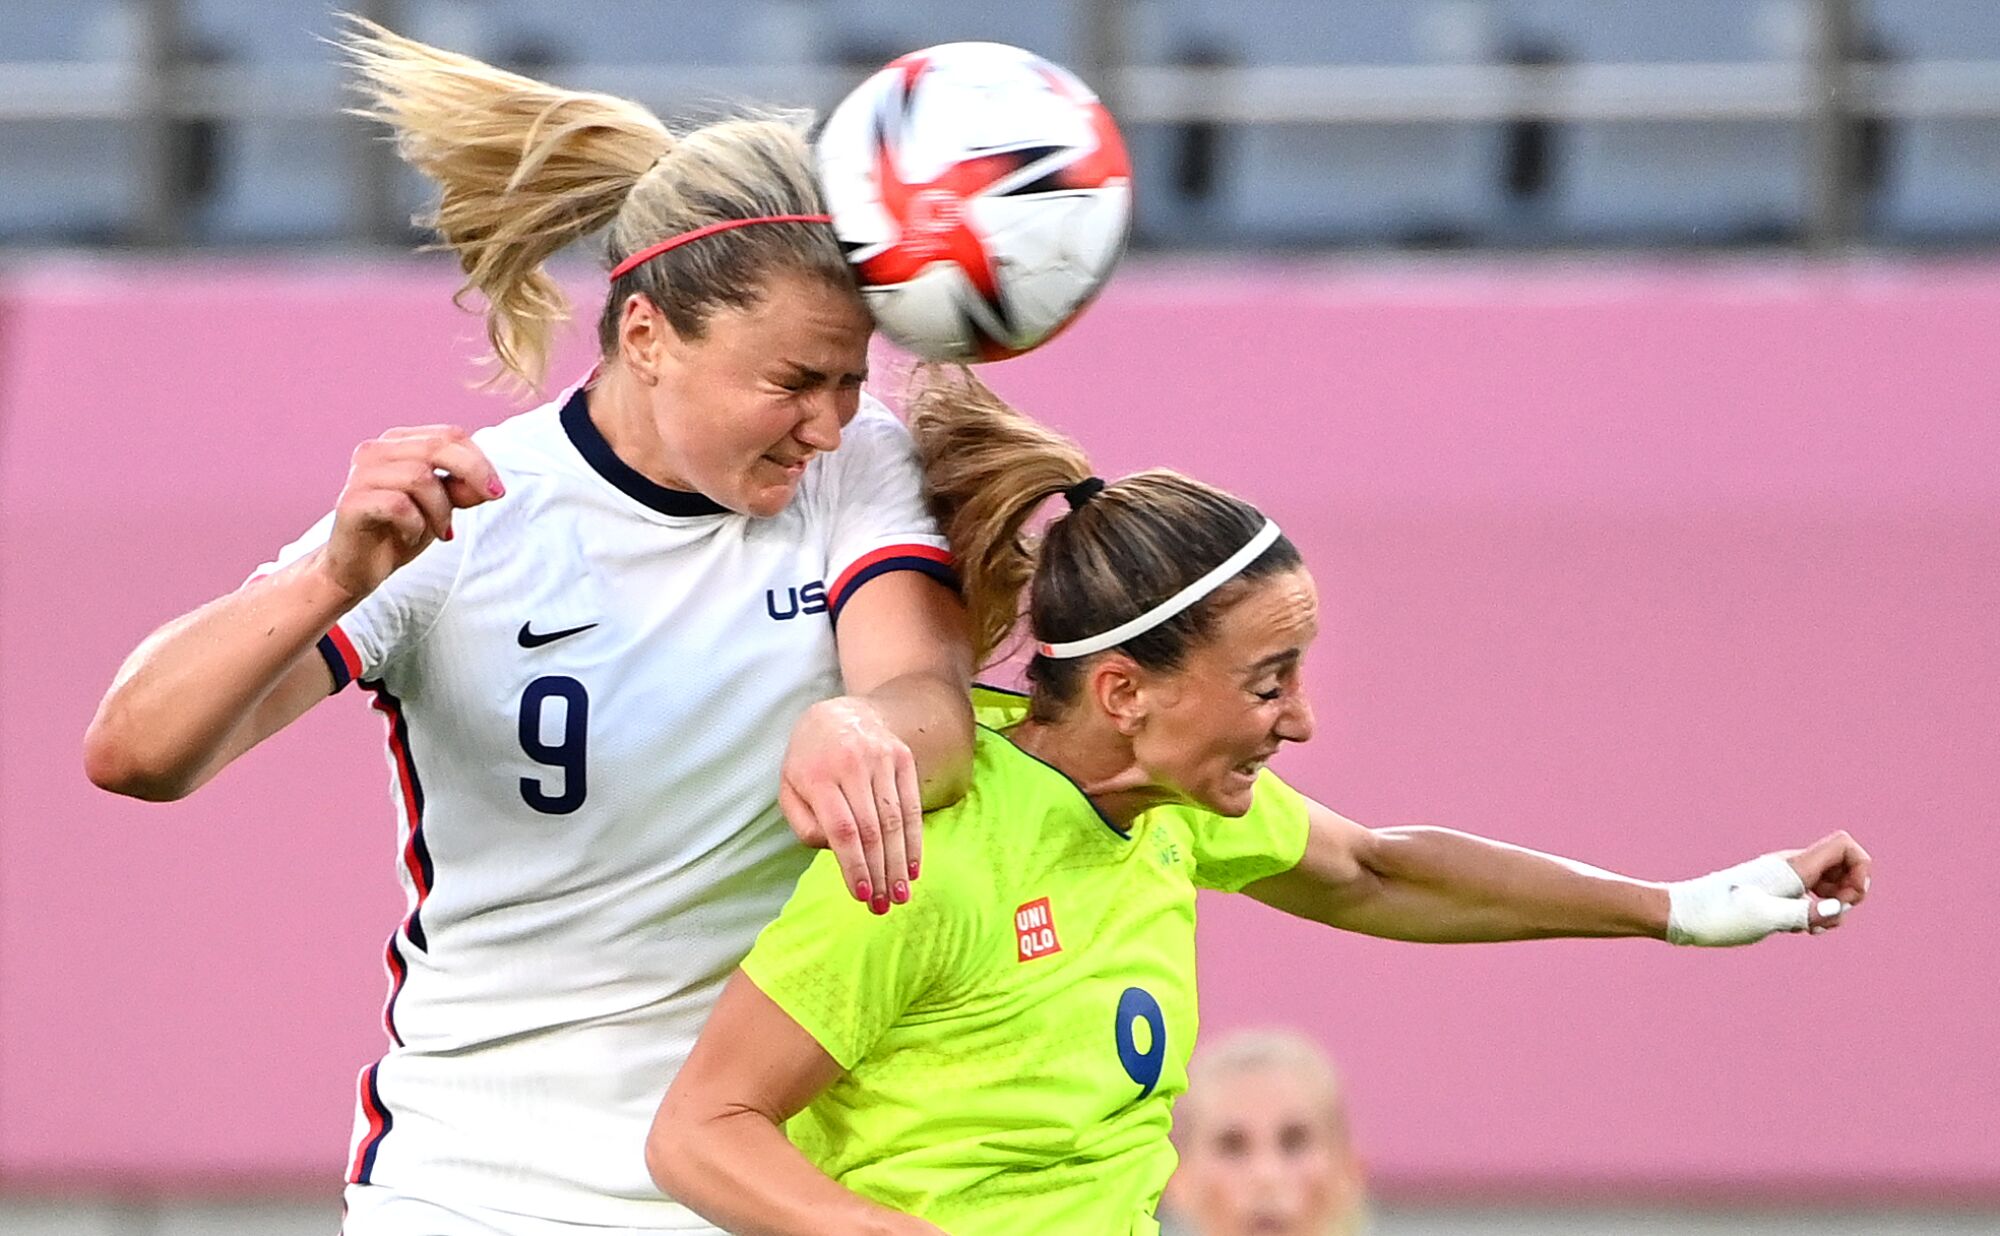 USA's Lindsey Horan hits the ball with her head as she battles for it with Sweden's Kosovare Asllani, who is in front of her